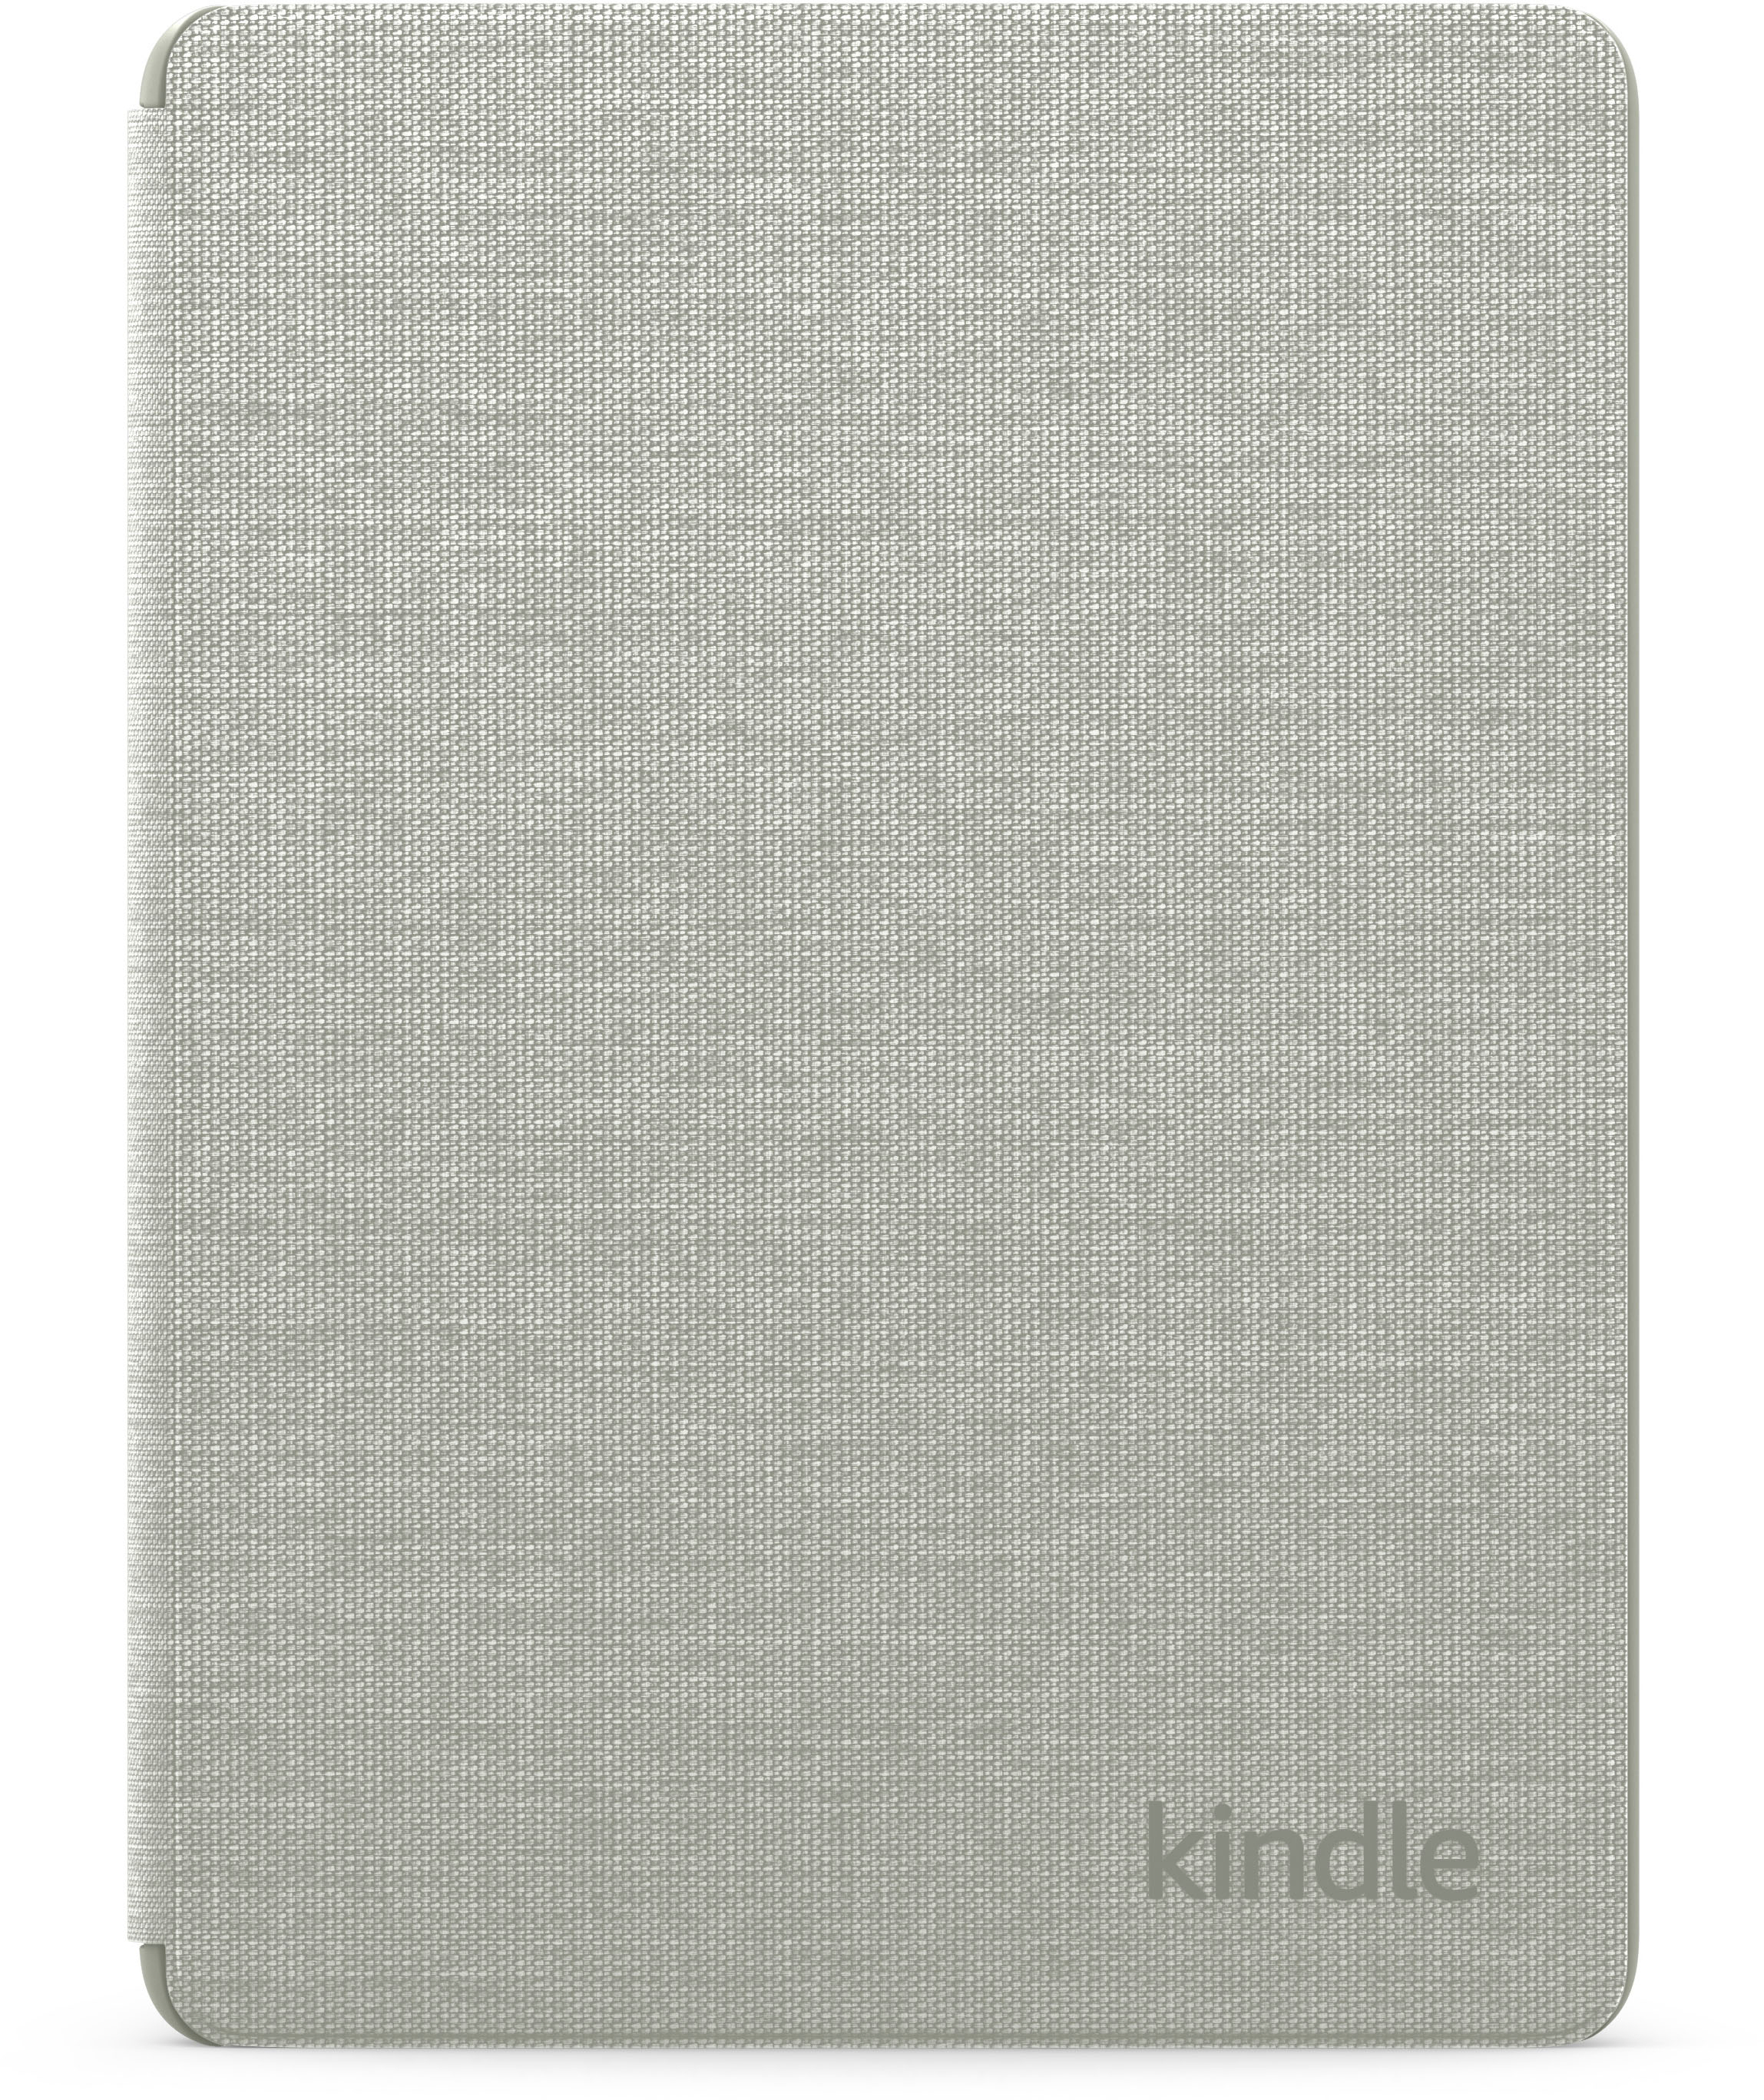 Kindle Paperwhite Fabric Case (11th Generation-2021) Agave